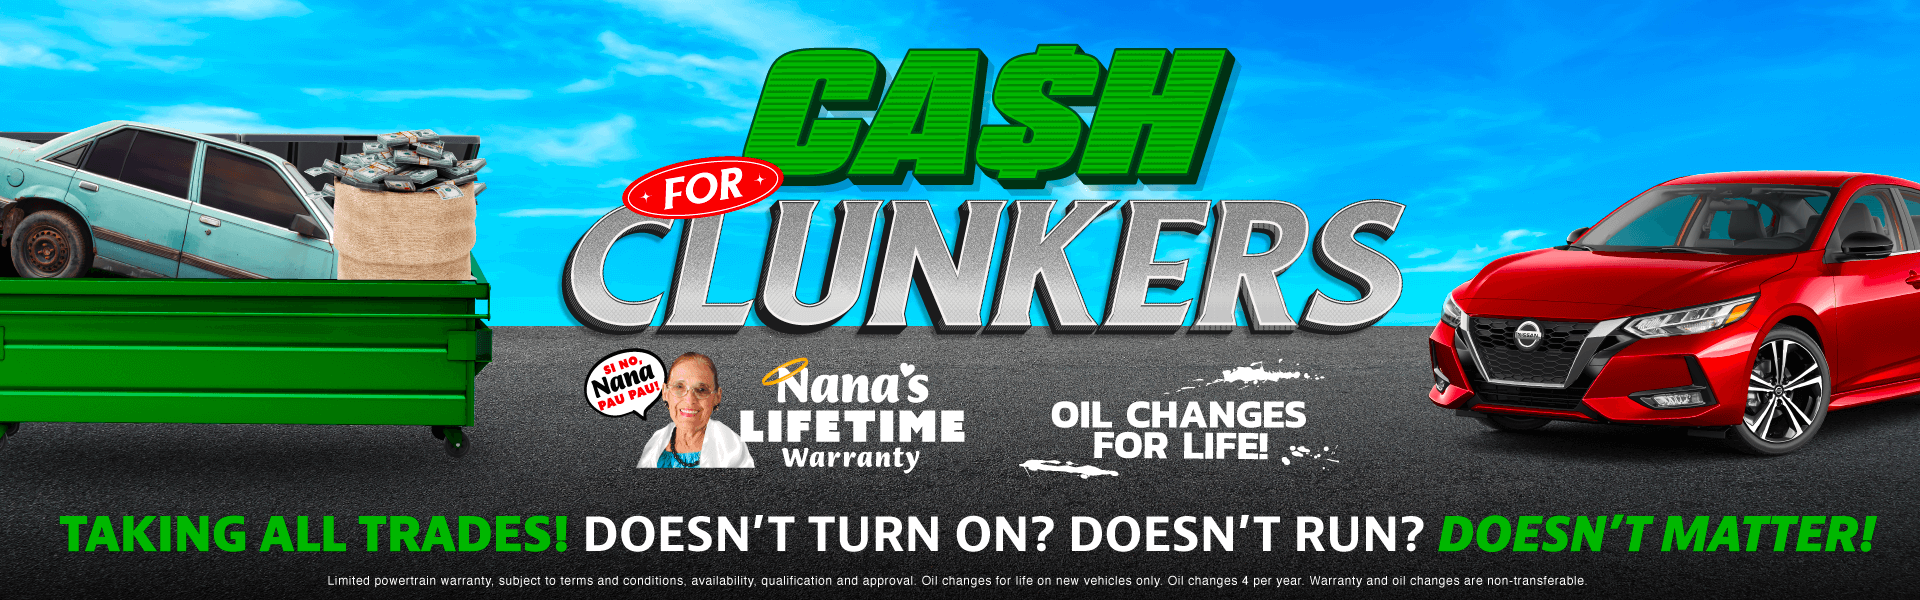 Cash for Clunkers